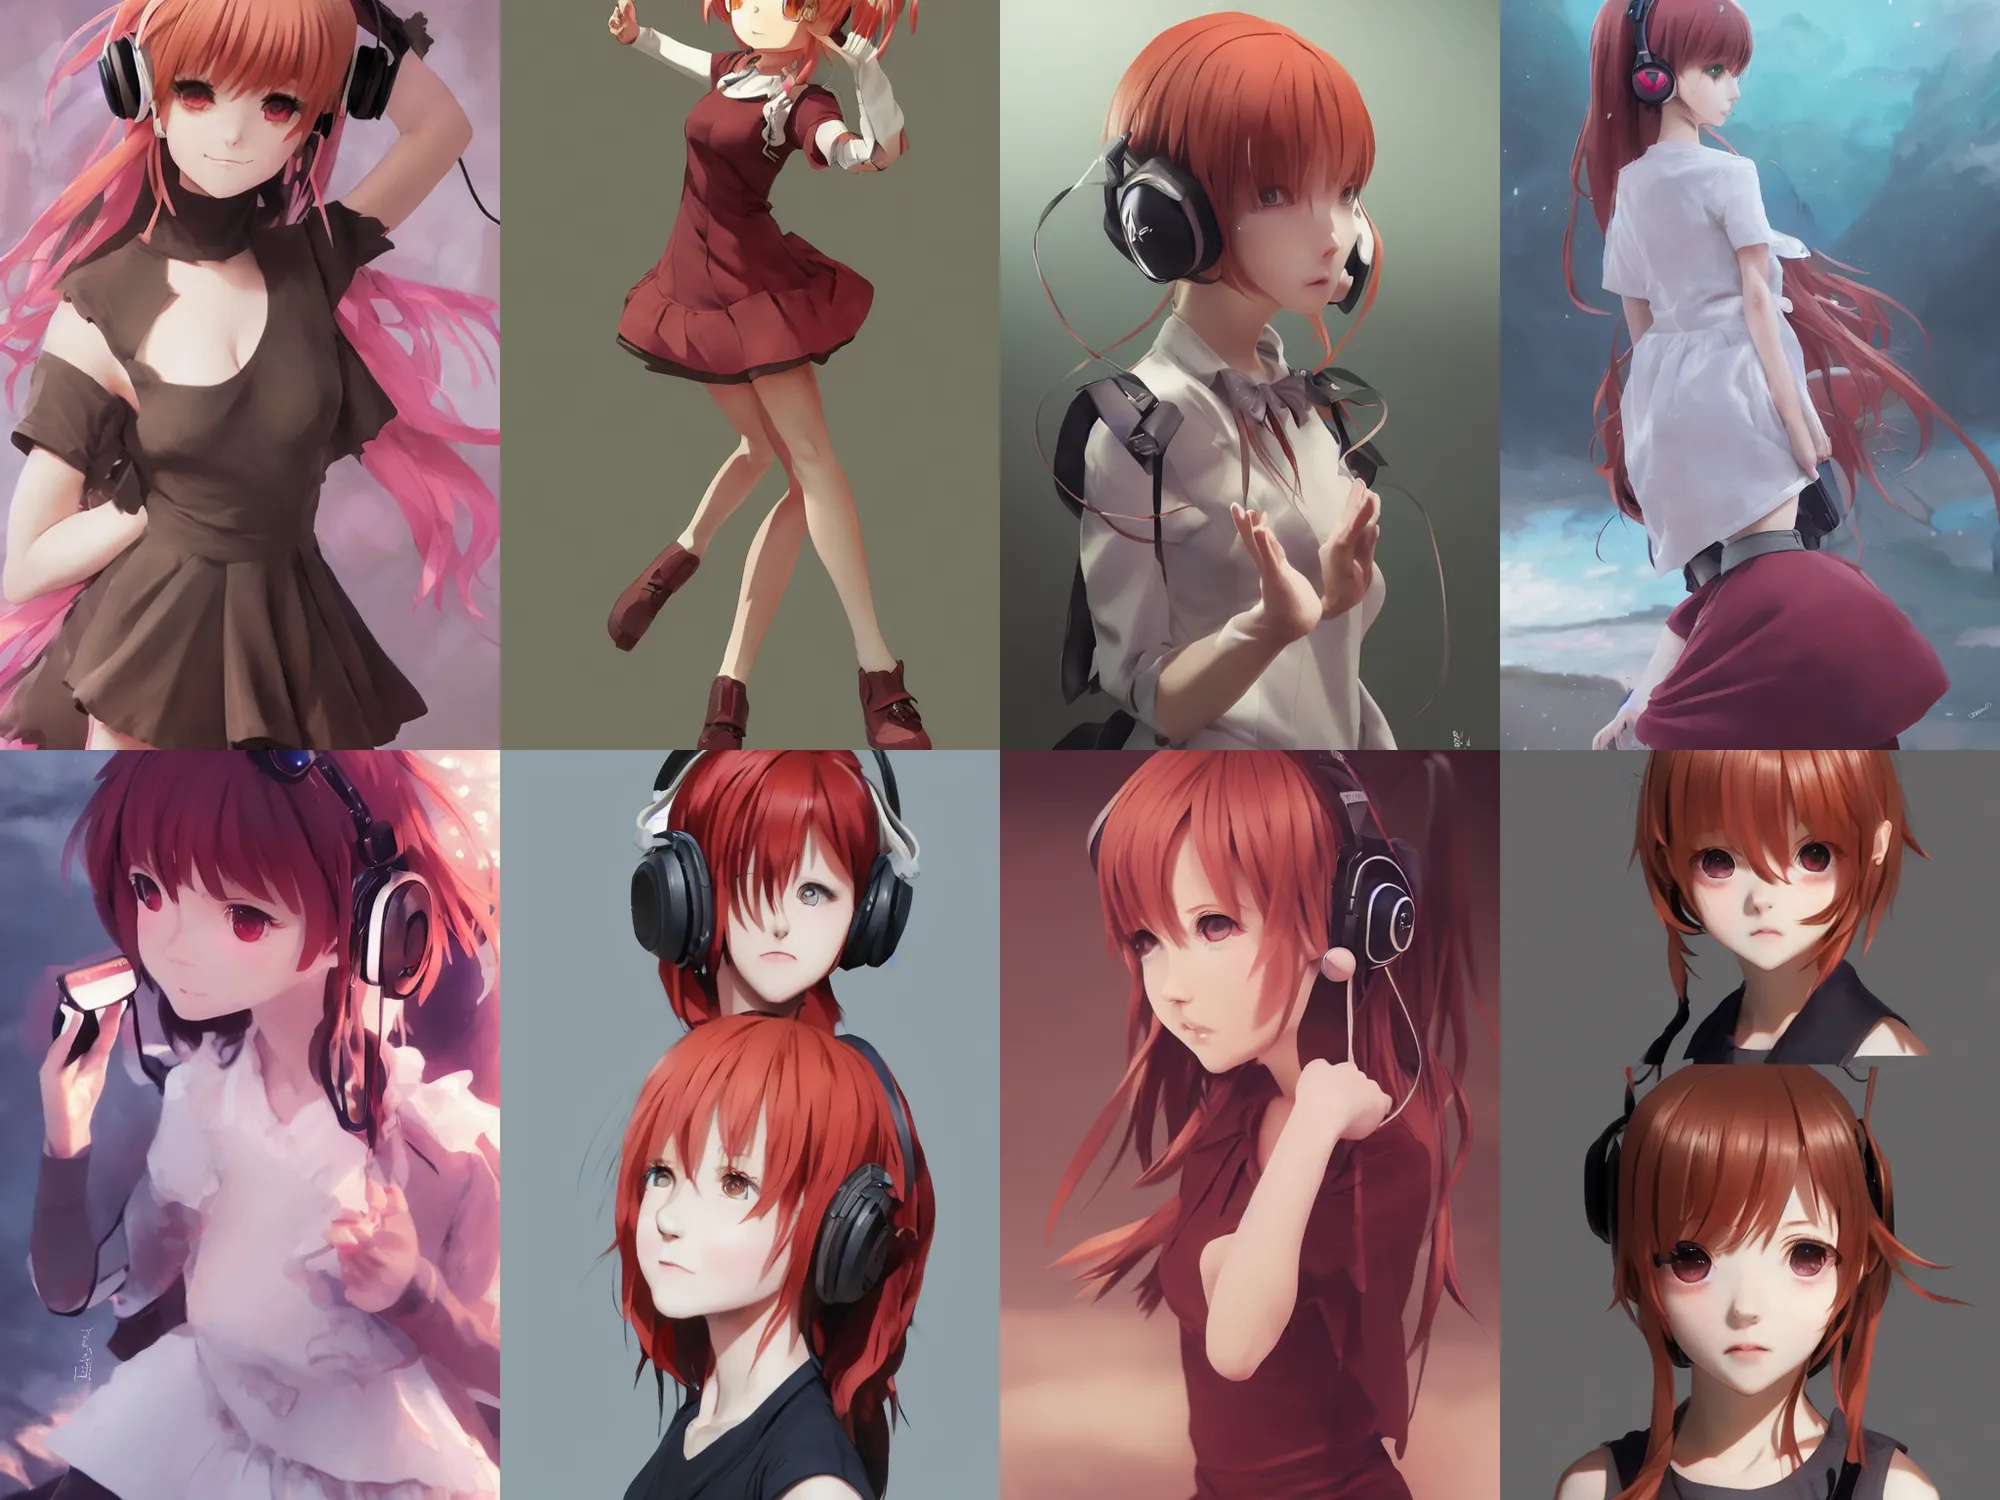 6,881 Red Haired Girl Anime Images, Stock Photos, 3D objects